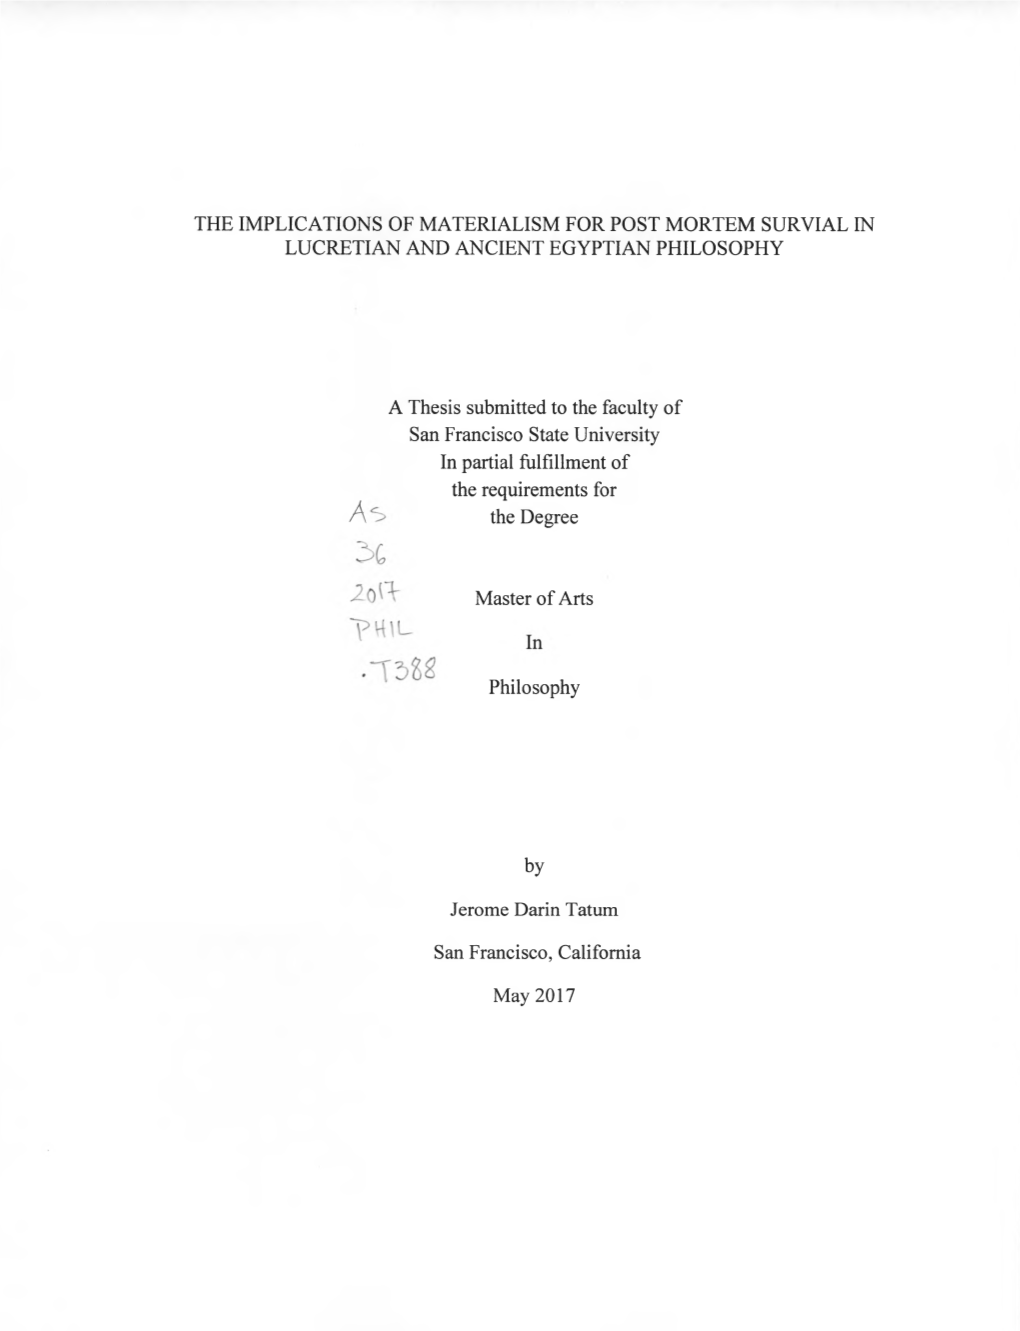 THE IMPLICATIONS of MATERIALISM for POST MORTEM SURVIAL in LUCRETIAN and ANCIENT EGYPTIAN PHILOSOPHY a Thesis Submitted to the F